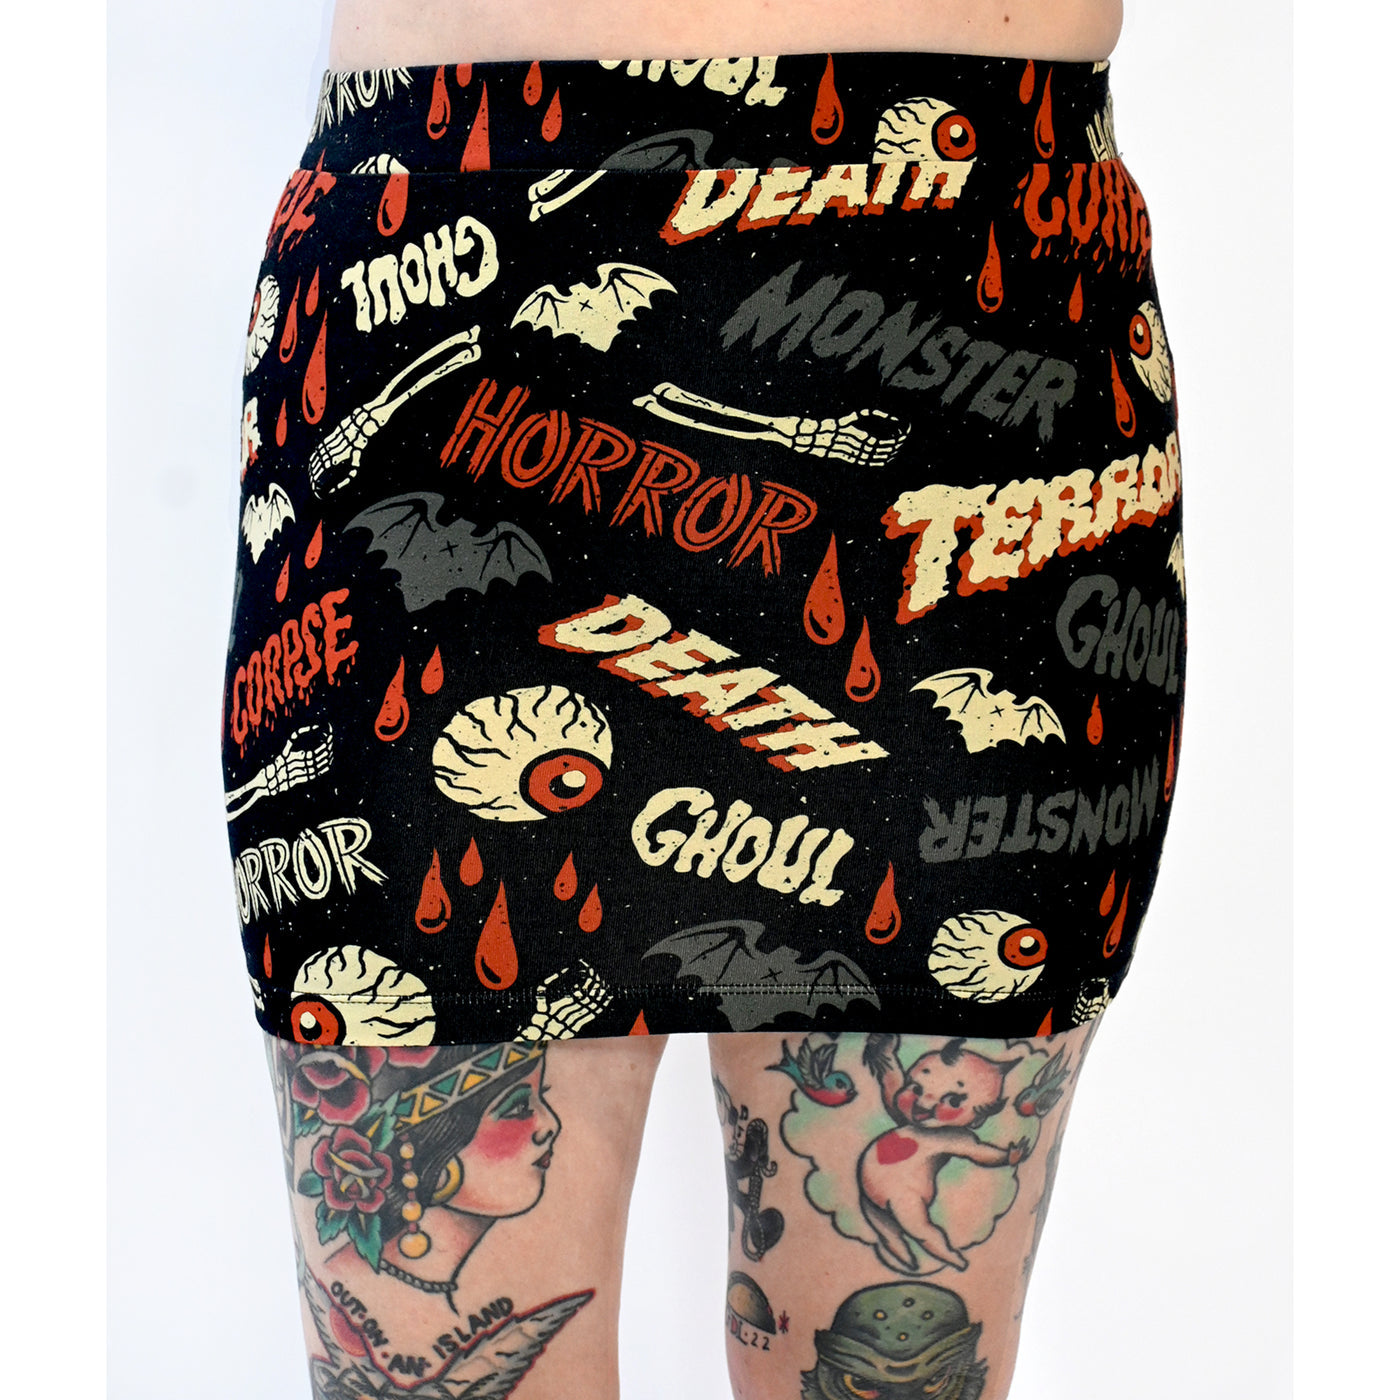 A black stretch knit mini skirt with an all-over pattern of bats, skeleton hands, dripping red blood, and eyeballs with the words “DEATH”, “GHOUL”, “MONSTER”, “HORROR” written in vintage movie poster style fonts in red, grey, and beige yellow. Seen up close